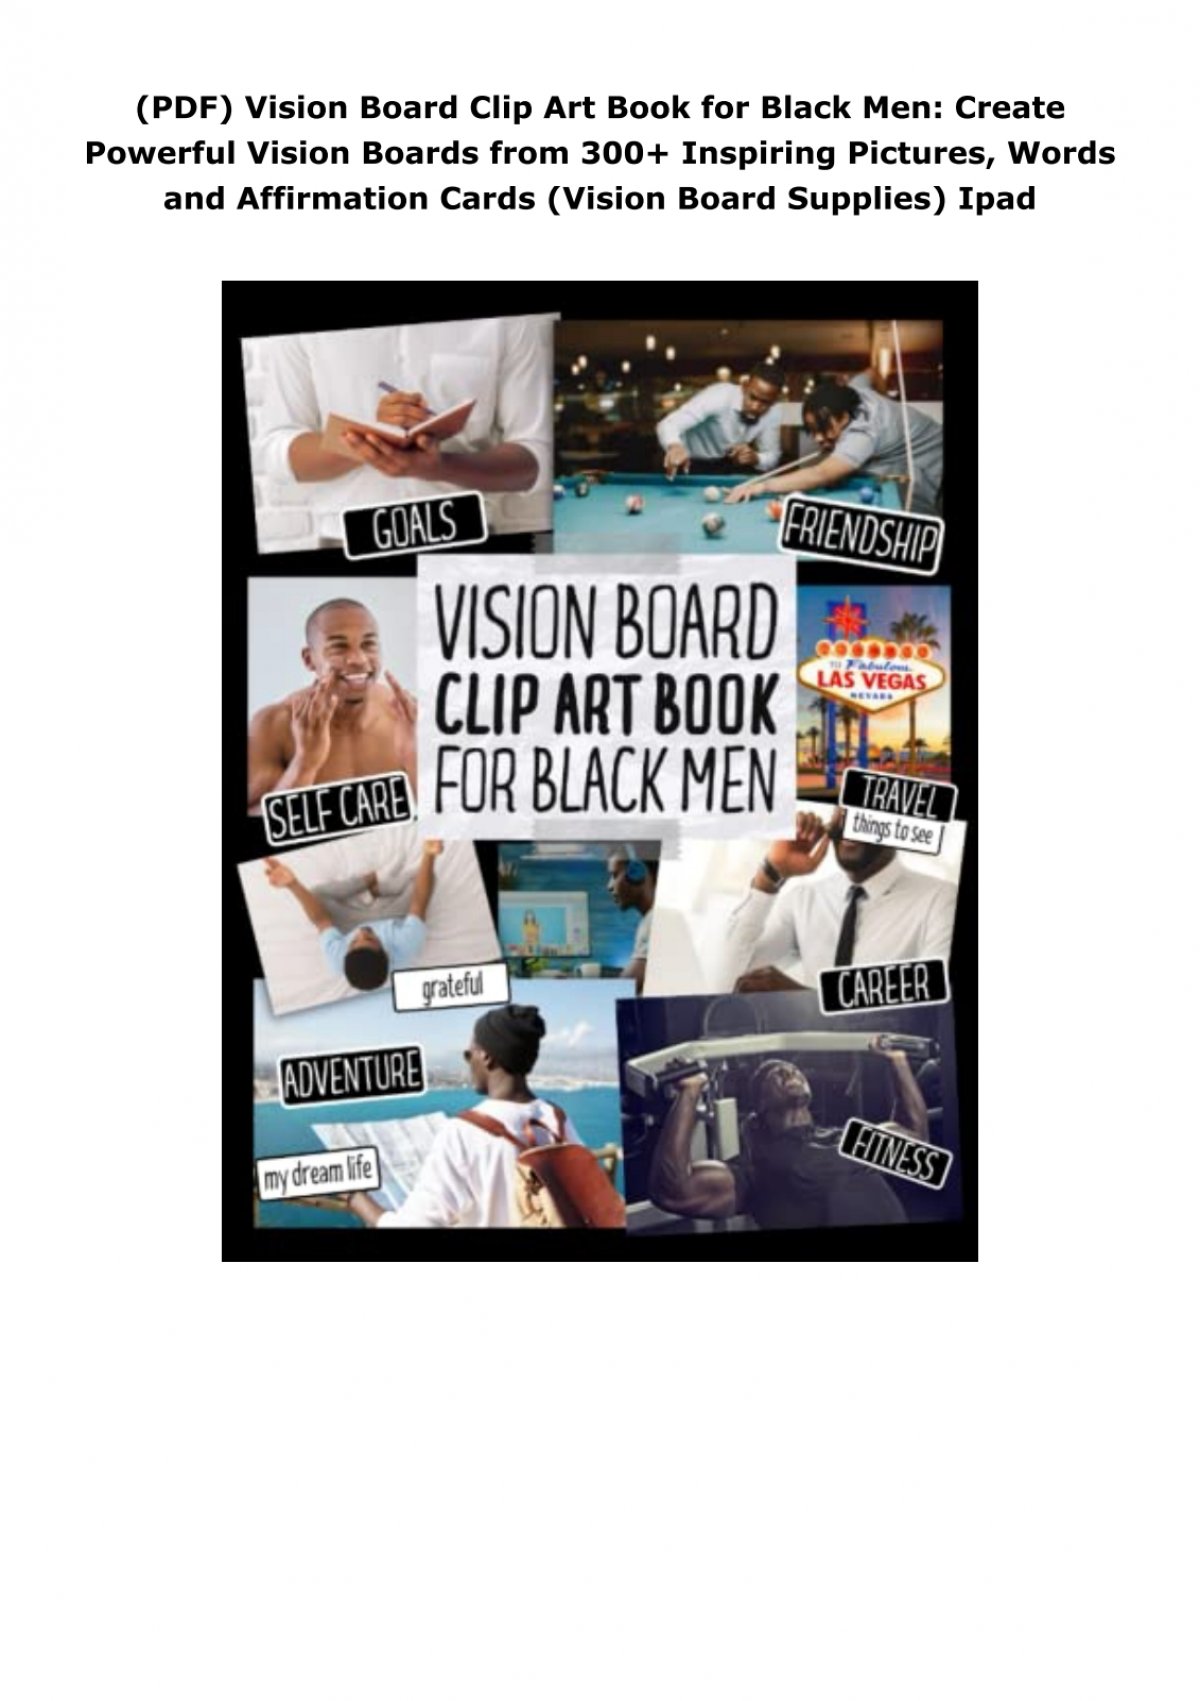 2023 Vision Board Clip Art Book for Women: An Extensive Collection of  Inspiring Images, Quotes & Affirmations for Personal Growth, Goal Setting,  and  features over 500 captivating images & words by